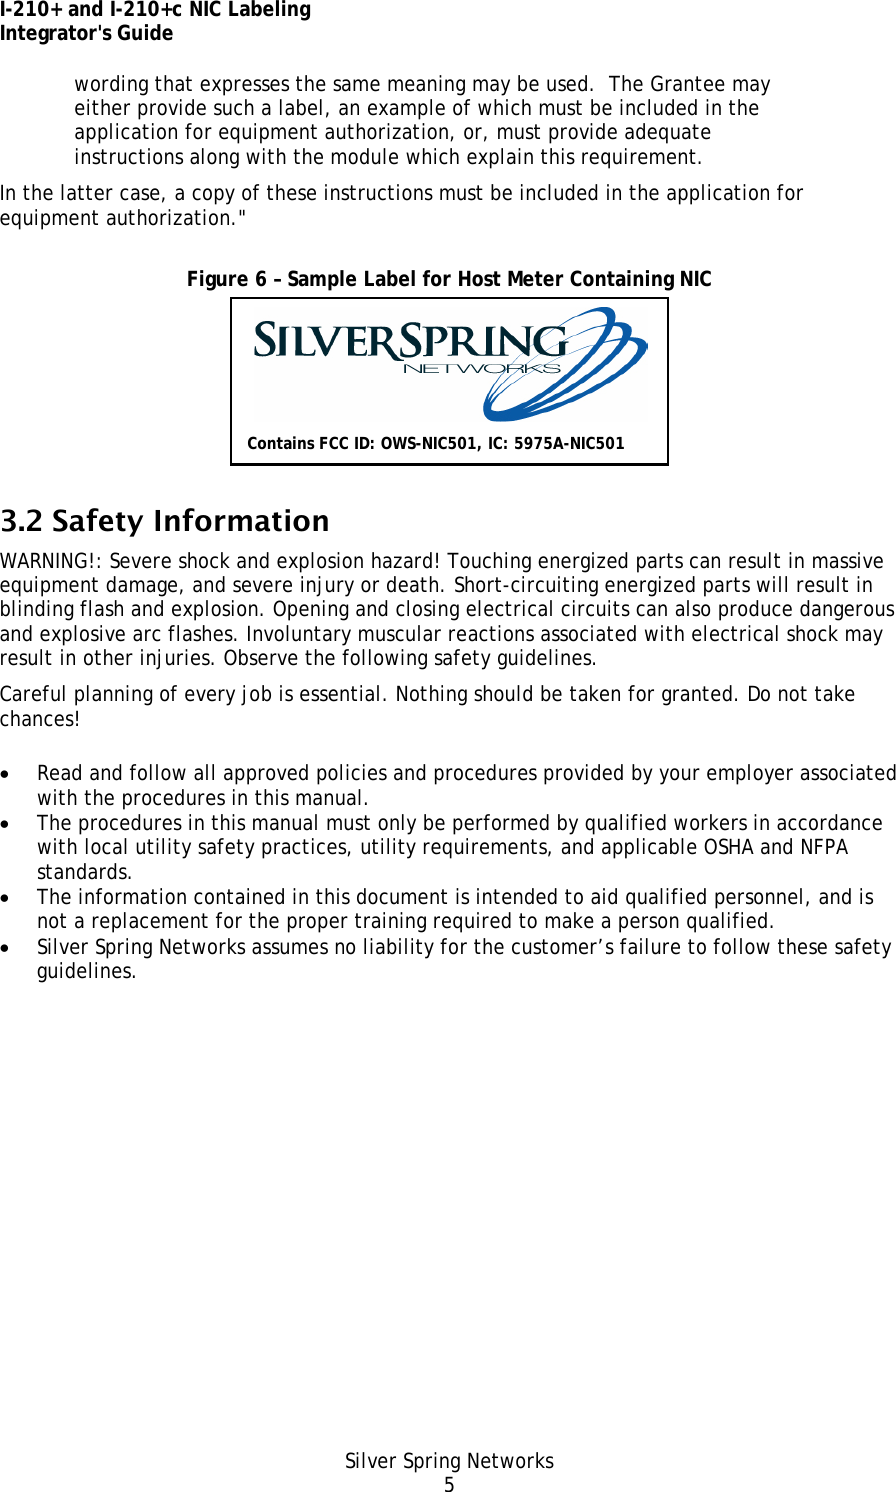 I-210+ and I-210+c NIC Labeling Integrator&apos;s Guide Silver Spring Networks 5 wording that expresses the same meaning may be used.  The Grantee may either provide such a label, an example of which must be included in the application for equipment authorization, or, must provide adequate instructions along with the module which explain this requirement.  In the latter case, a copy of these instructions must be included in the application for equipment authorization.&quot;  Figure 6 – Sample Label for Host Meter Containing NIC  3.2 Safety Information WARNING!: Severe shock and explosion hazard! Touching energized parts can result in massive equipment damage, and severe injury or death. Short-circuiting energized parts will result in blinding flash and explosion. Opening and closing electrical circuits can also produce dangerous and explosive arc flashes. Involuntary muscular reactions associated with electrical shock may result in other injuries. Observe the following safety guidelines. Careful planning of every job is essential. Nothing should be taken for granted. Do not take chances! • Read and follow all approved policies and procedures provided by your employer associated with the procedures in this manual. • The procedures in this manual must only be performed by qualified workers in accordance with local utility safety practices, utility requirements, and applicable OSHA and NFPA standards. • The information contained in this document is intended to aid qualified personnel, and is not a replacement for the proper training required to make a person qualified. • Silver Spring Networks assumes no liability for the customer’s failure to follow these safety guidelines. Contains FCC ID: OWS-NIC501, IC: 5975A-NIC501 